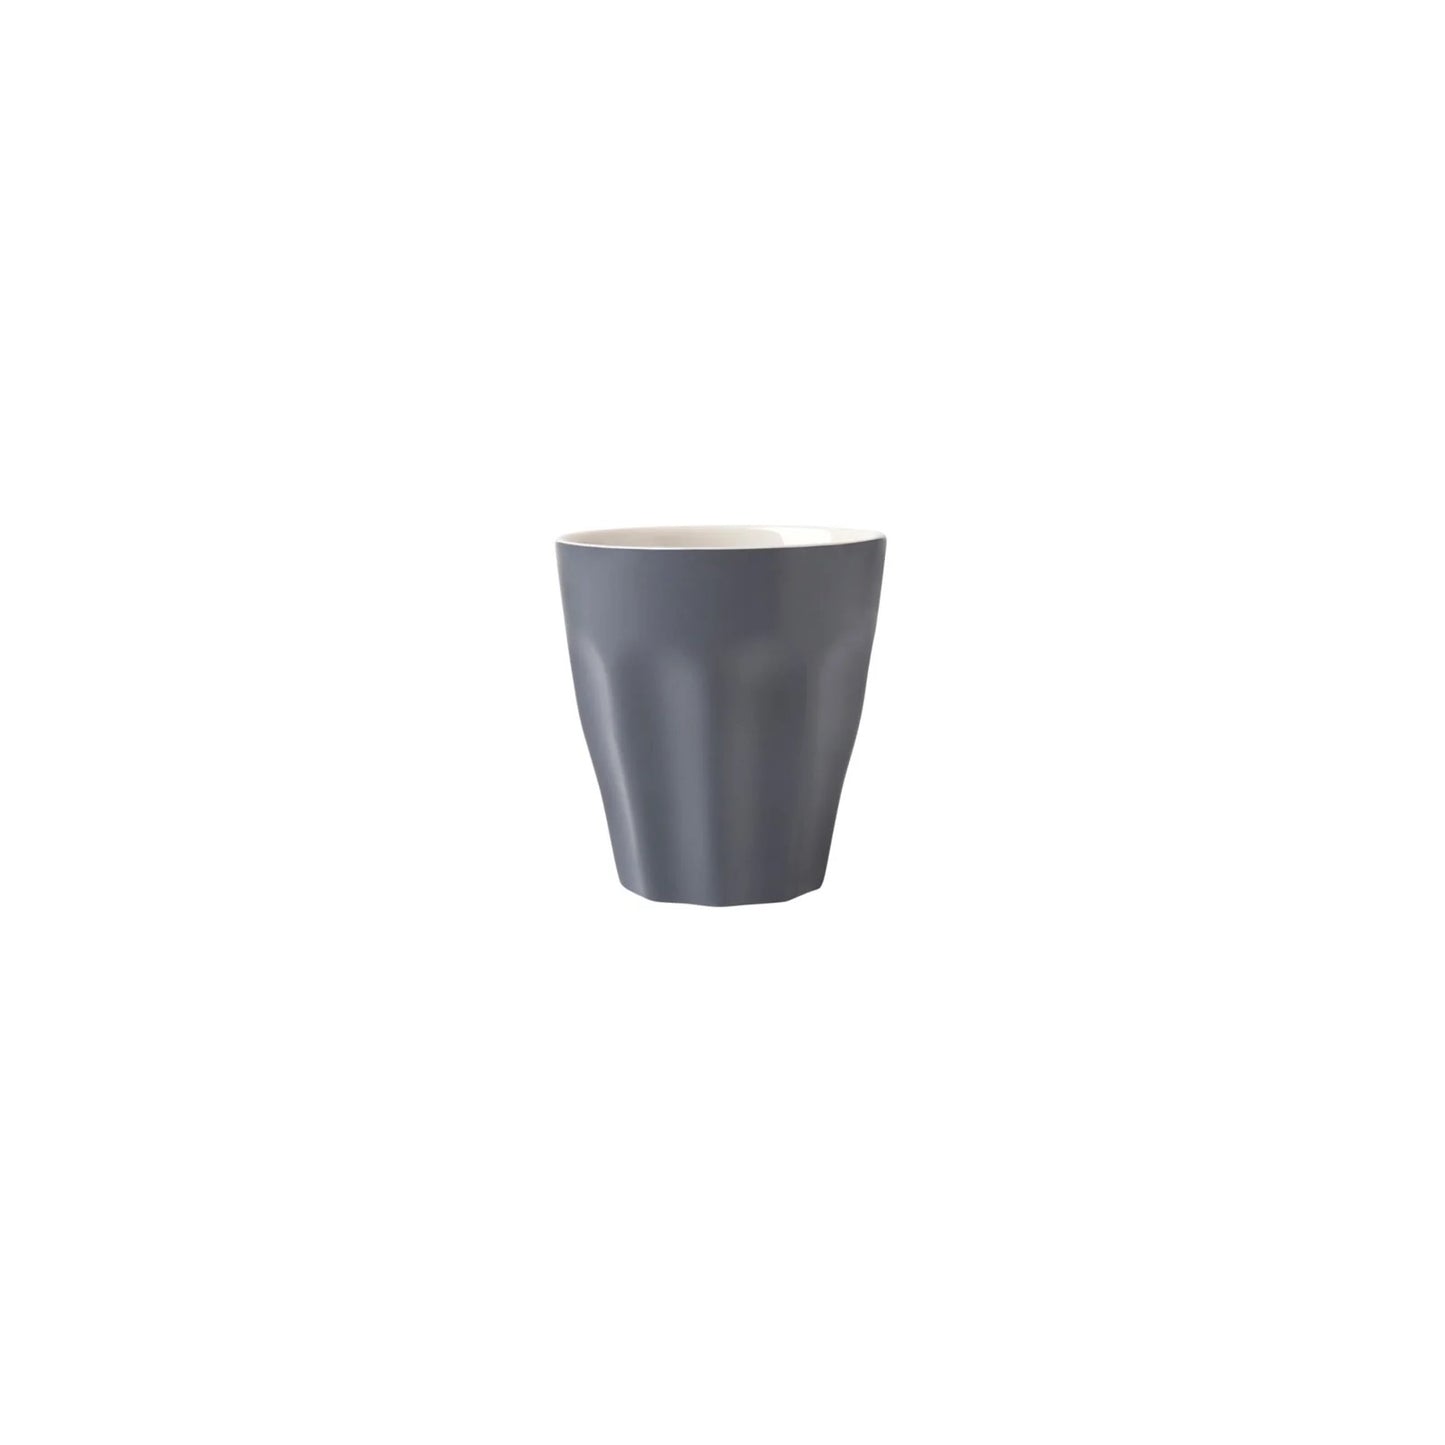 Blend Sala Set of 4 Latte Cups in Charcoal